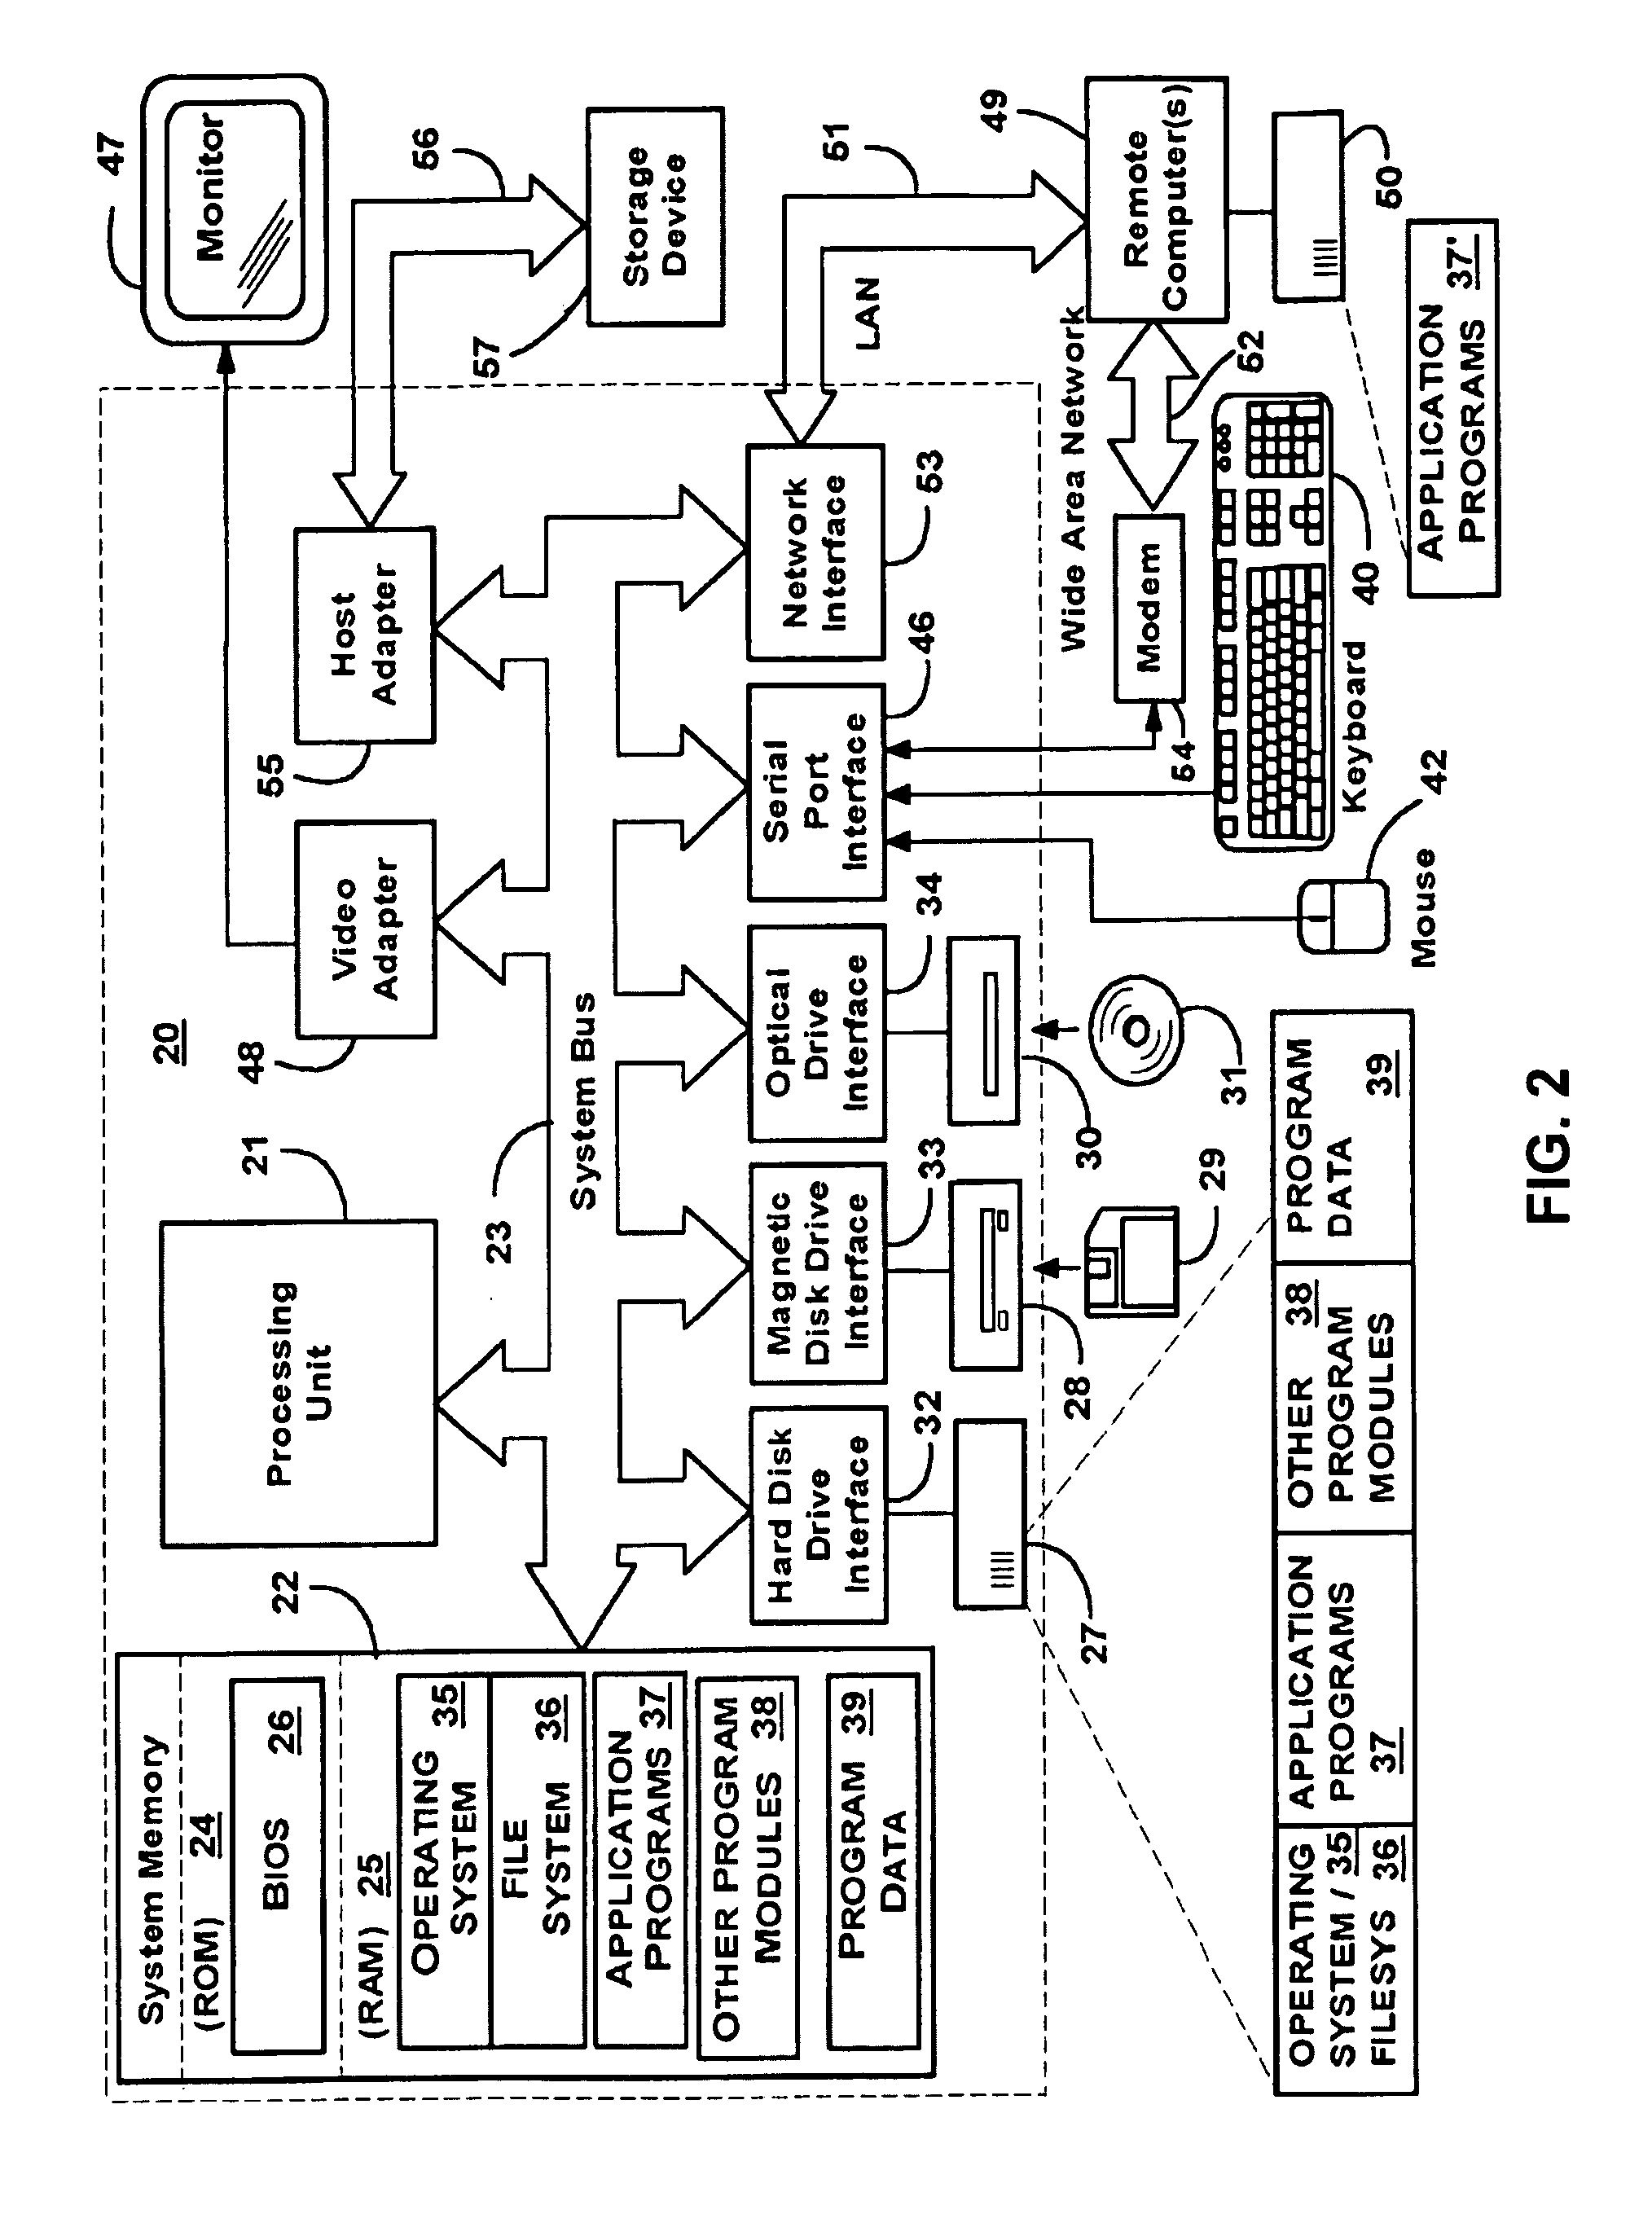 Method and system for antimalware scanning with variable scan settings